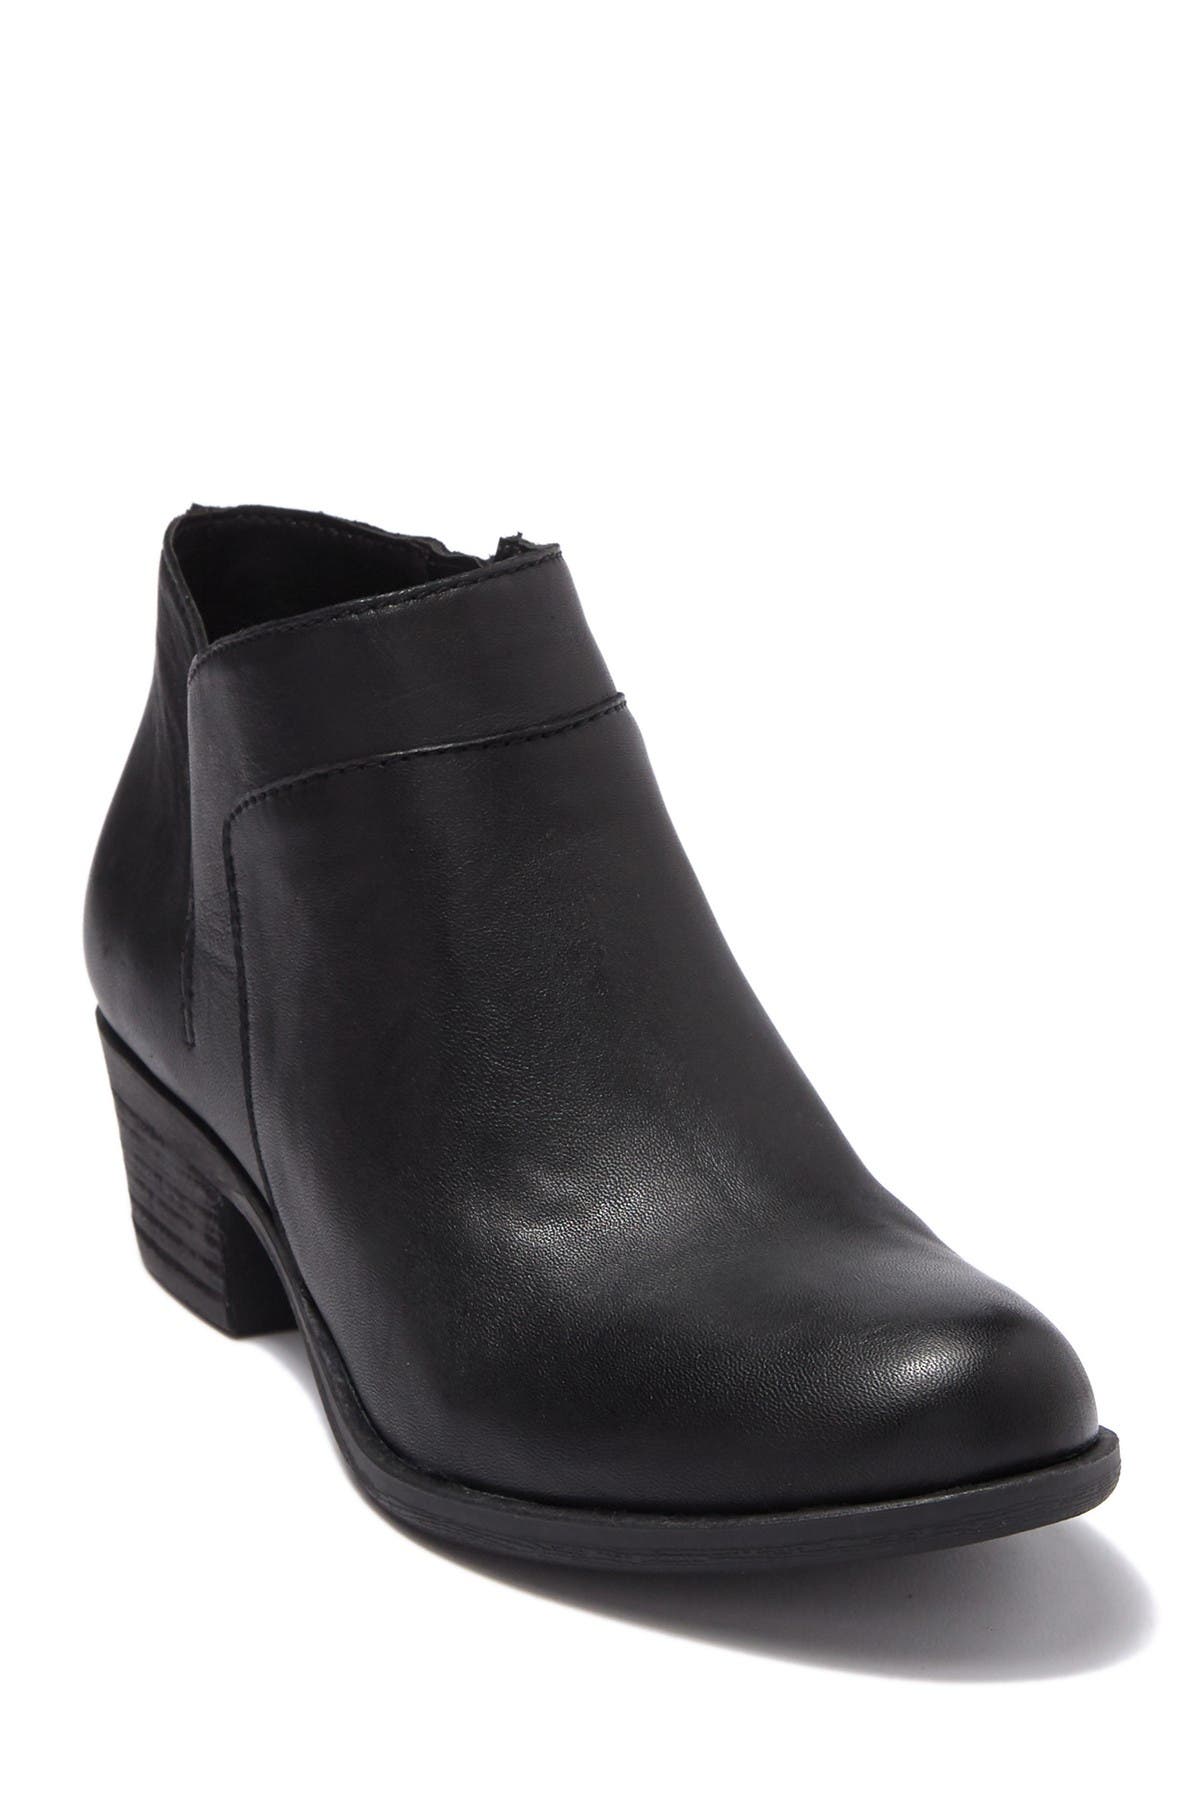 lucky brand womens ankle boots low heel